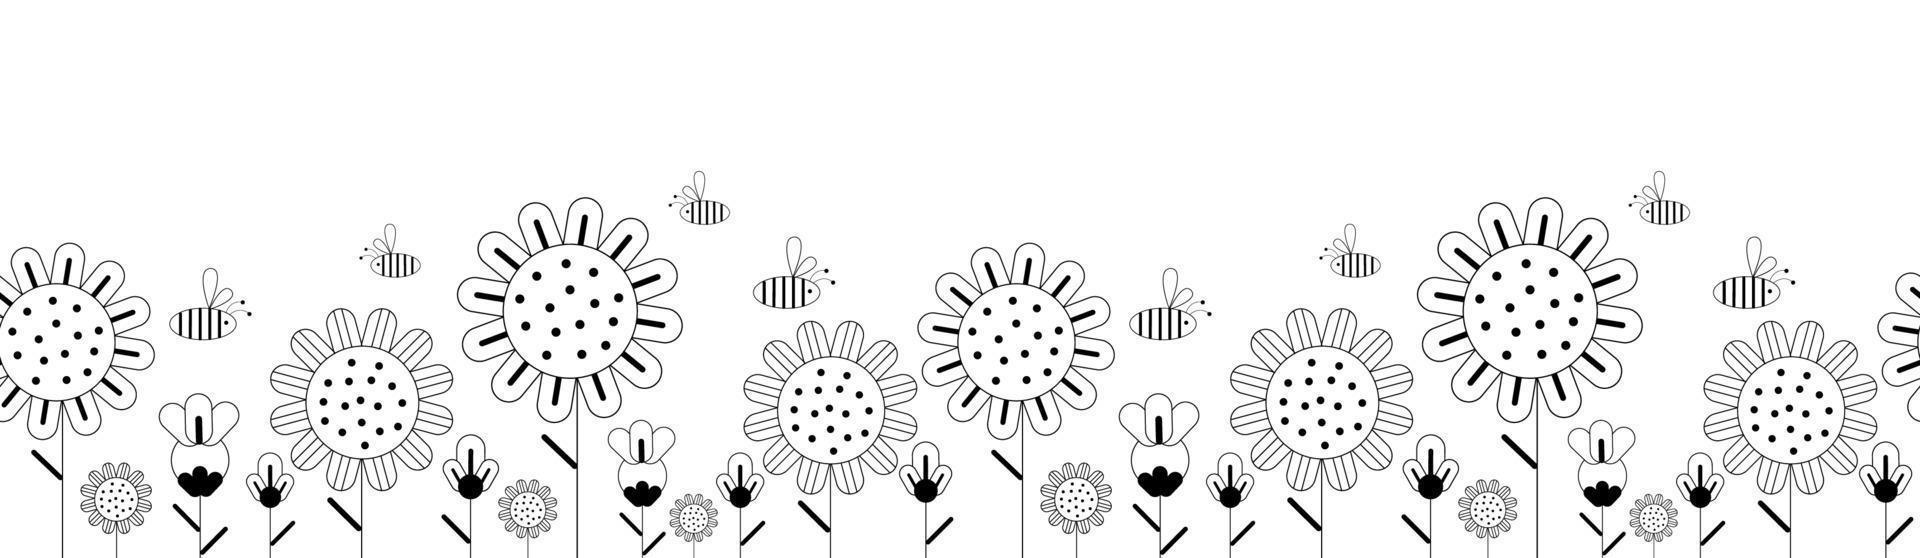 Graphic black flowers and bees vector seamless long background or banner isolated on white background.